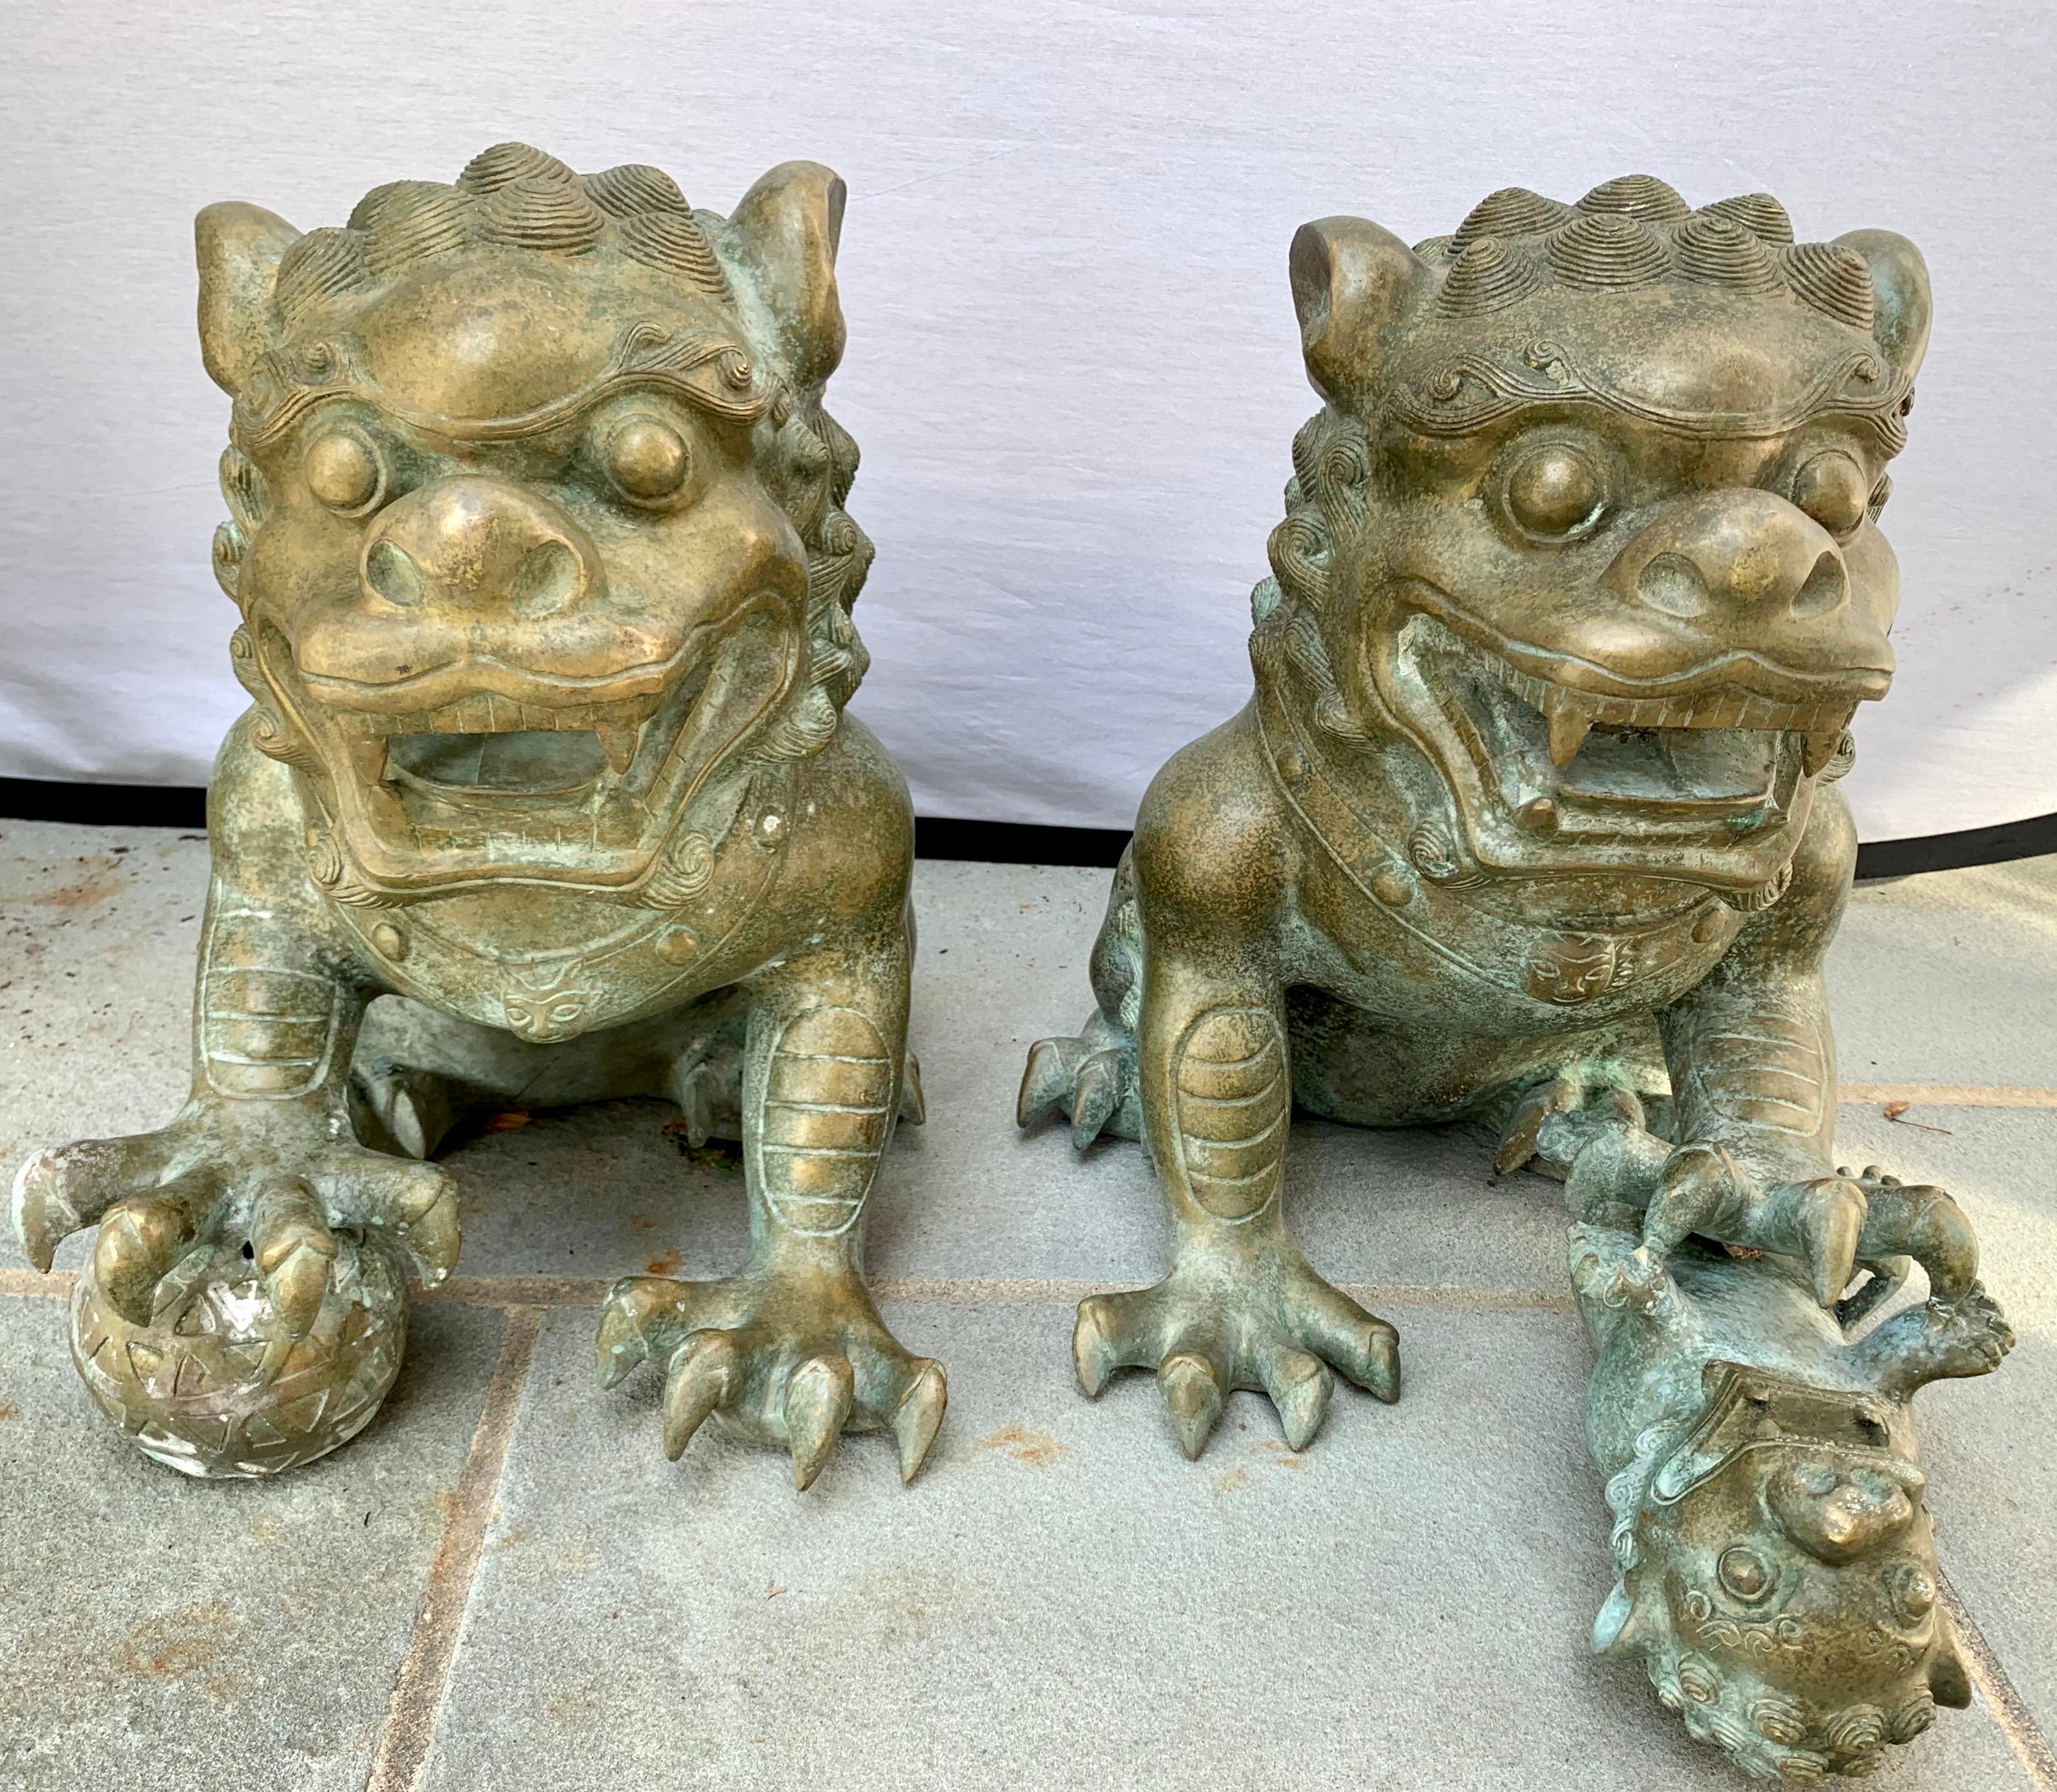 Magnificent pair of heavy bronze foo dog sculptures from a Hamptons estate.
Now, more than ever, home is where the heart is.